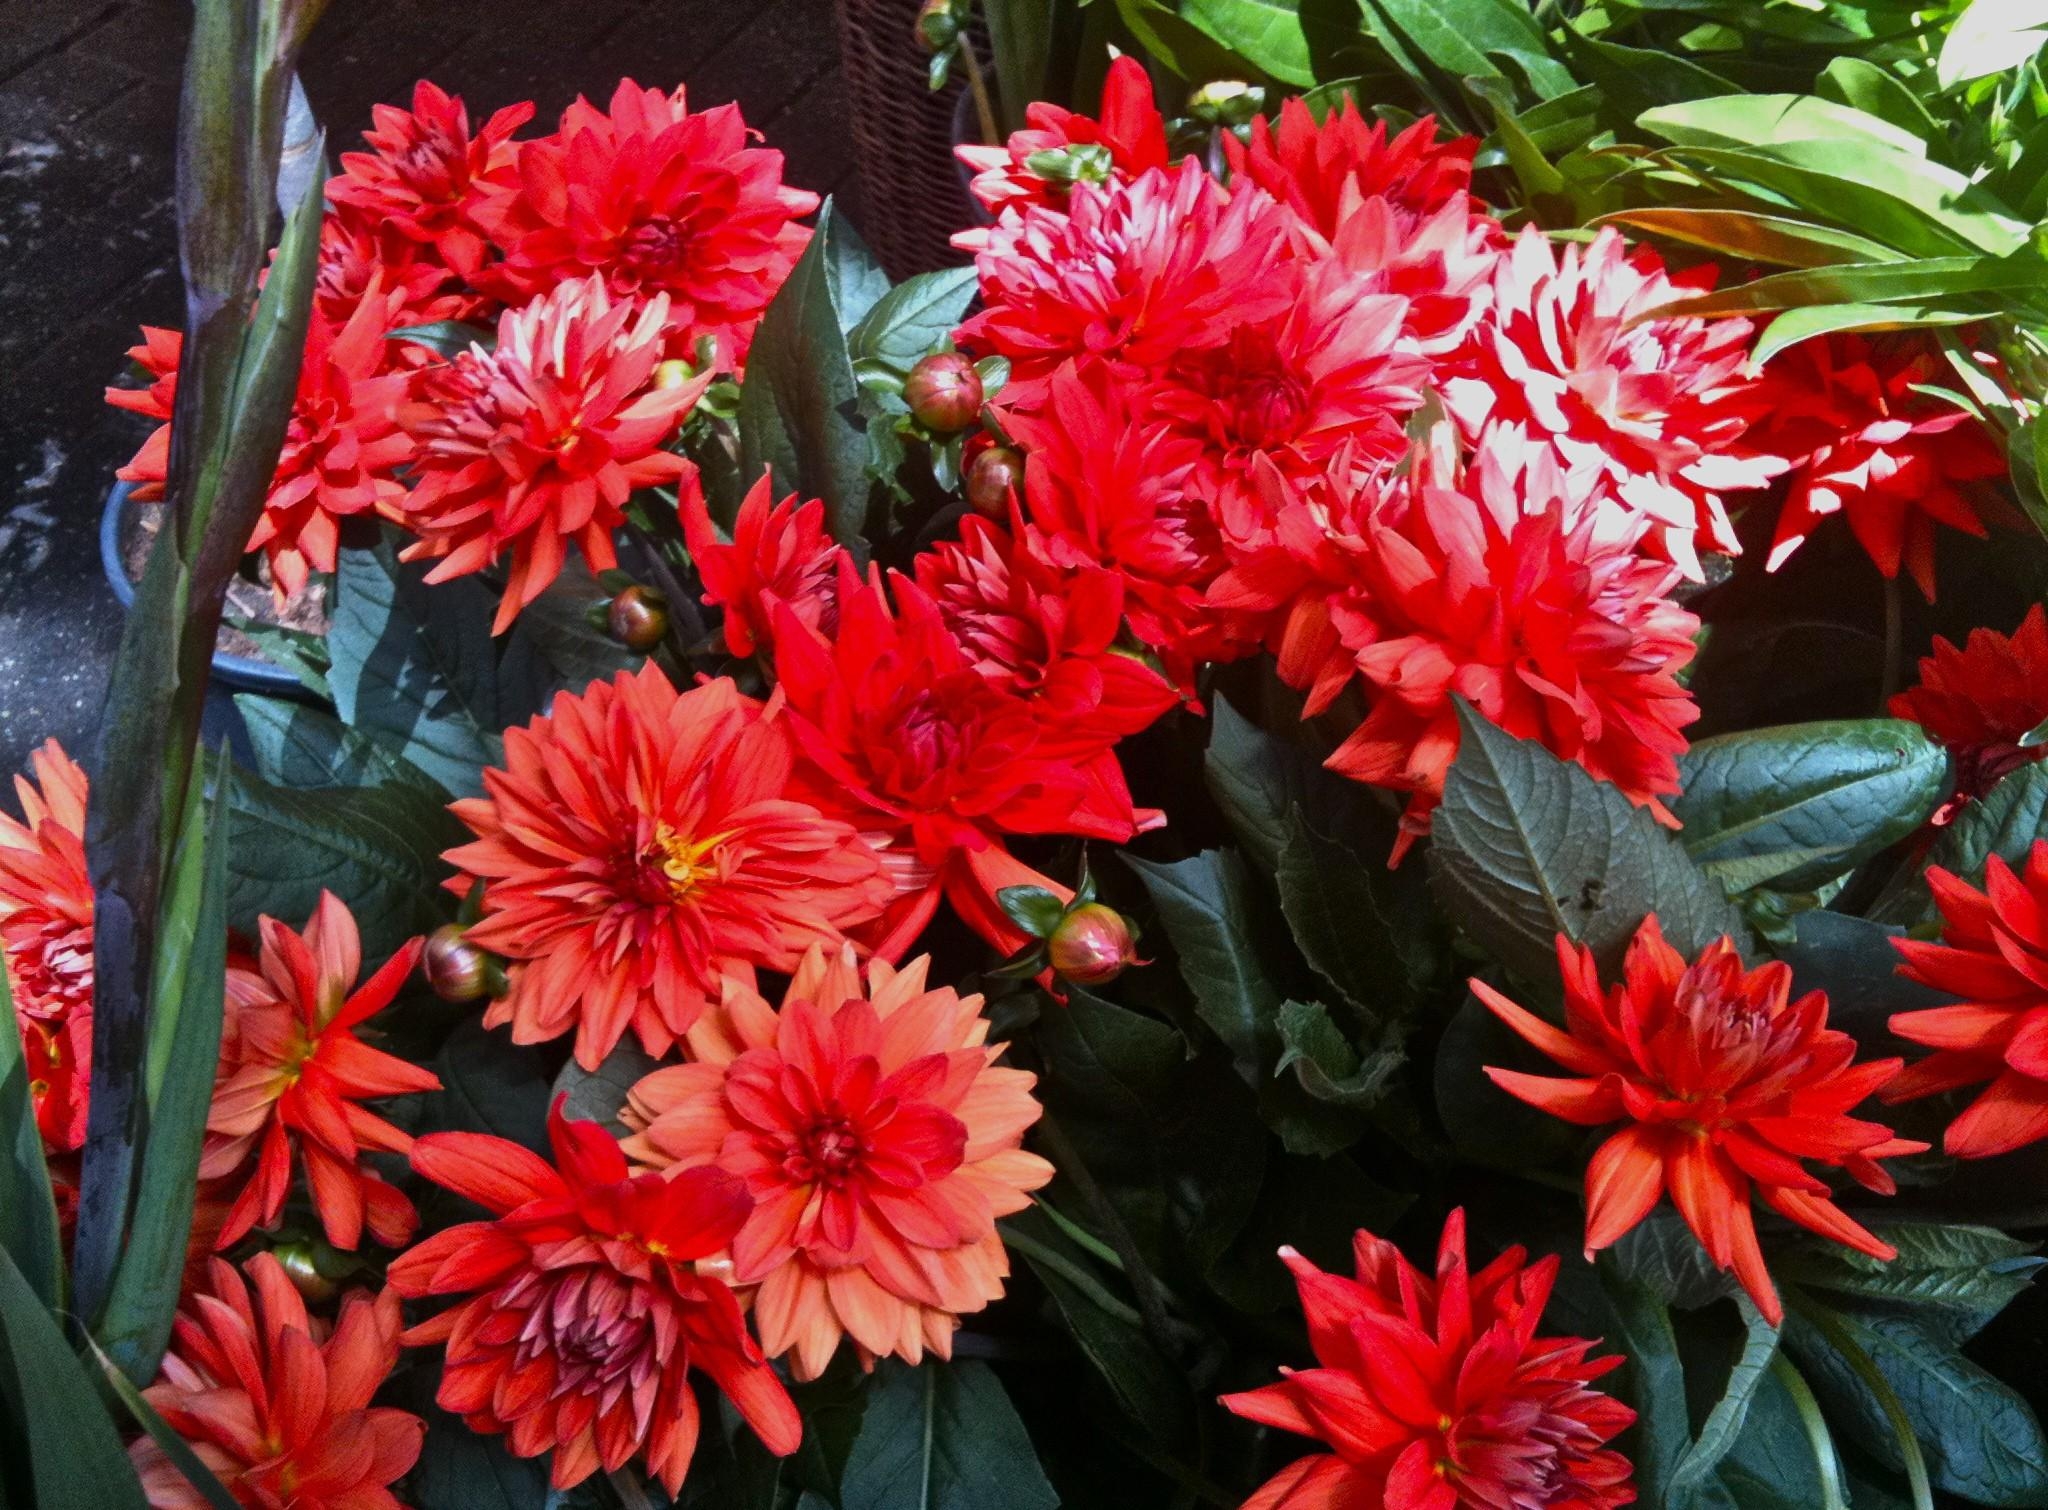 Windows Backgrounds flowerbed, flowers, red, flower bed, dahlias